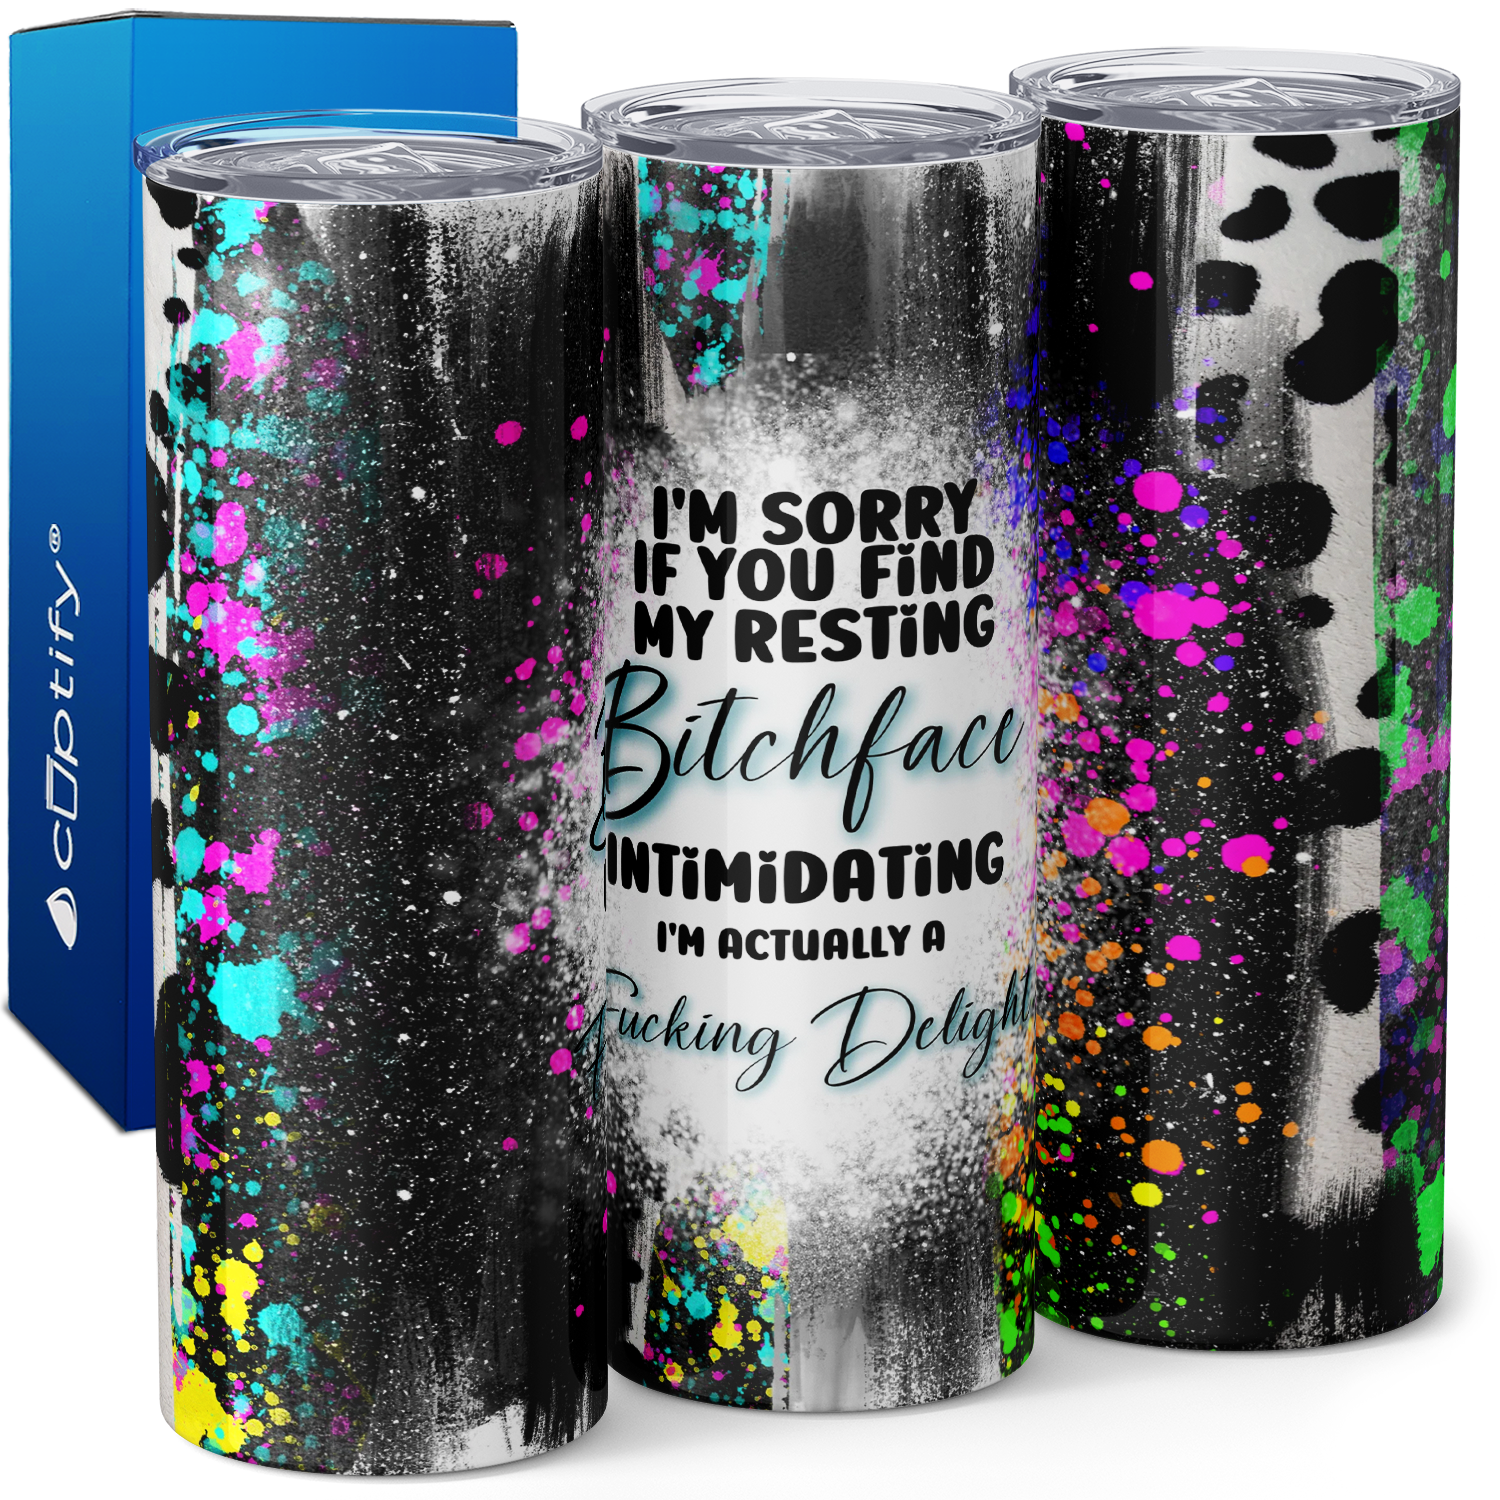 I'm Sorry if You Find My Resting Bitchface Intimidating 20oz Skinny Tumbler